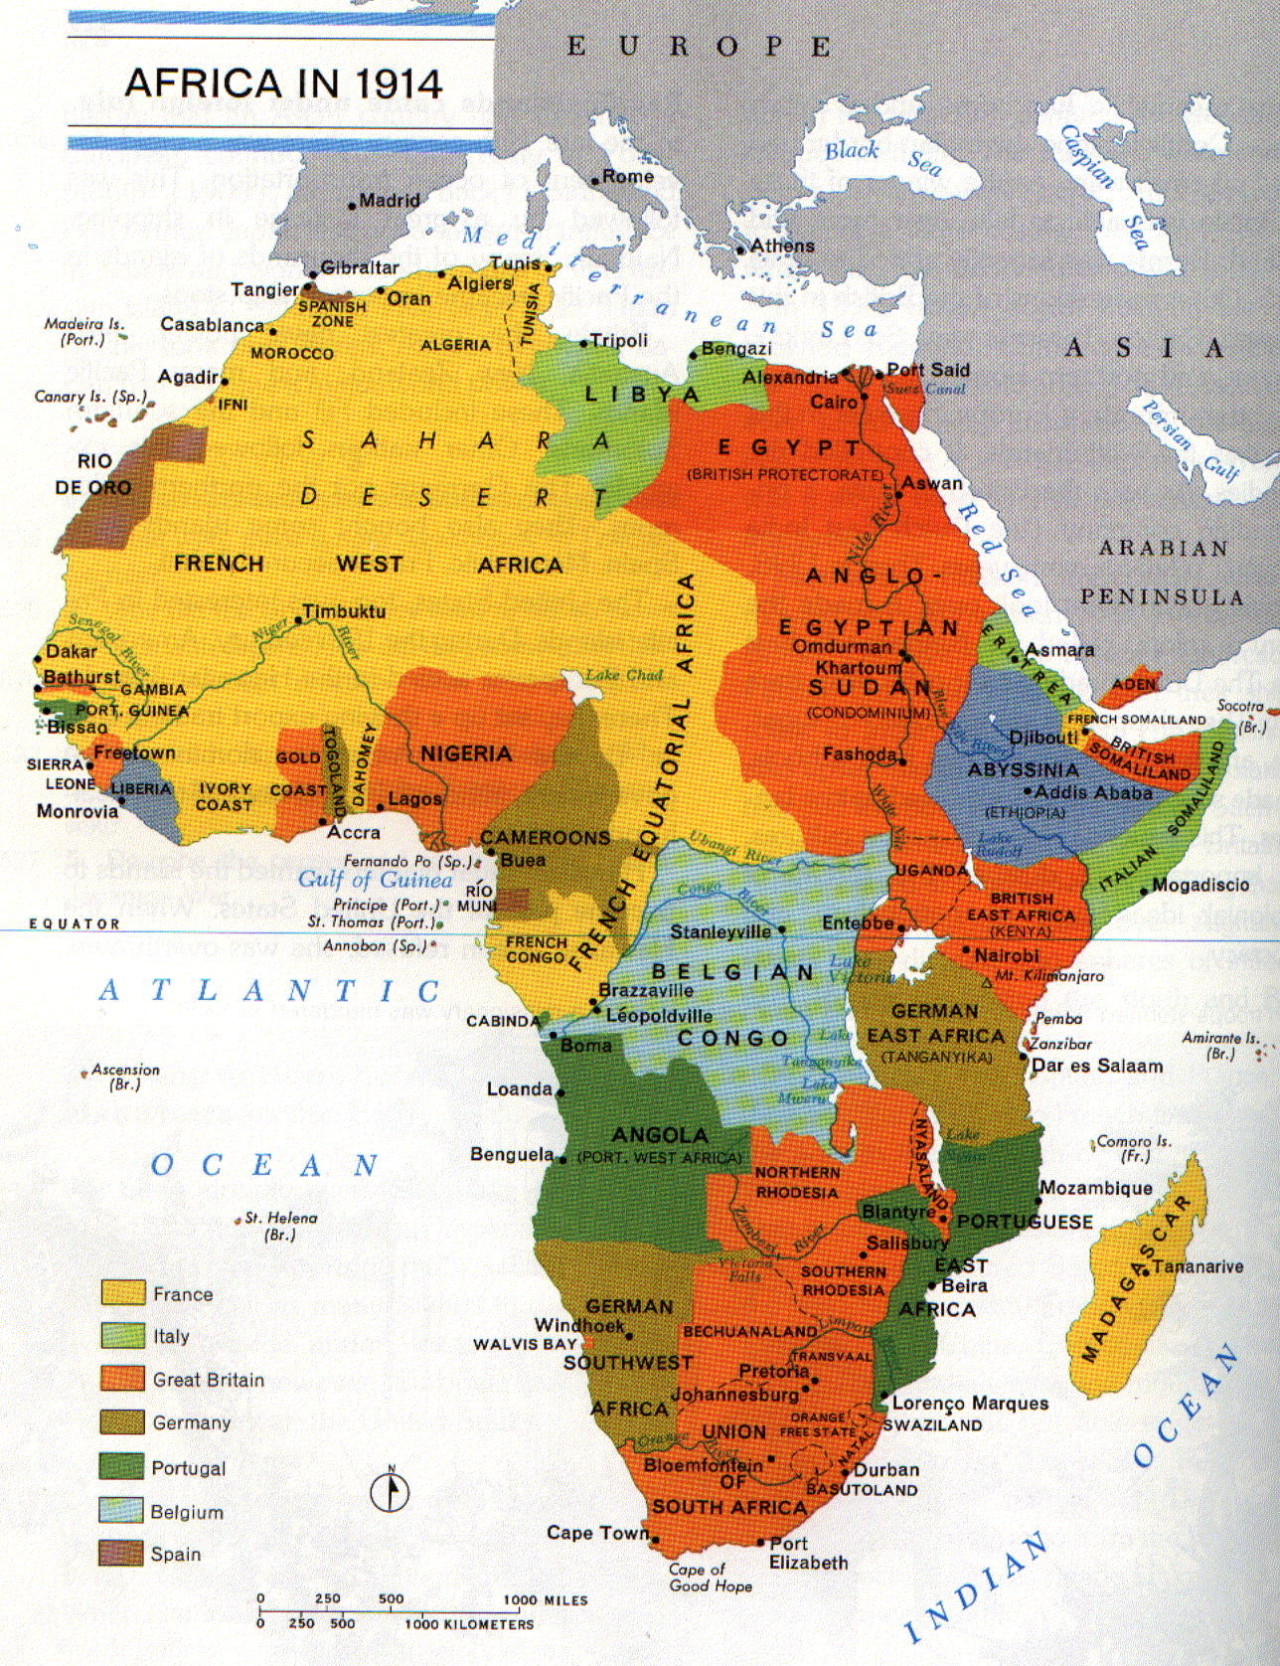 Africa at the dawn of World War 1, 1914 - Maps on the Web